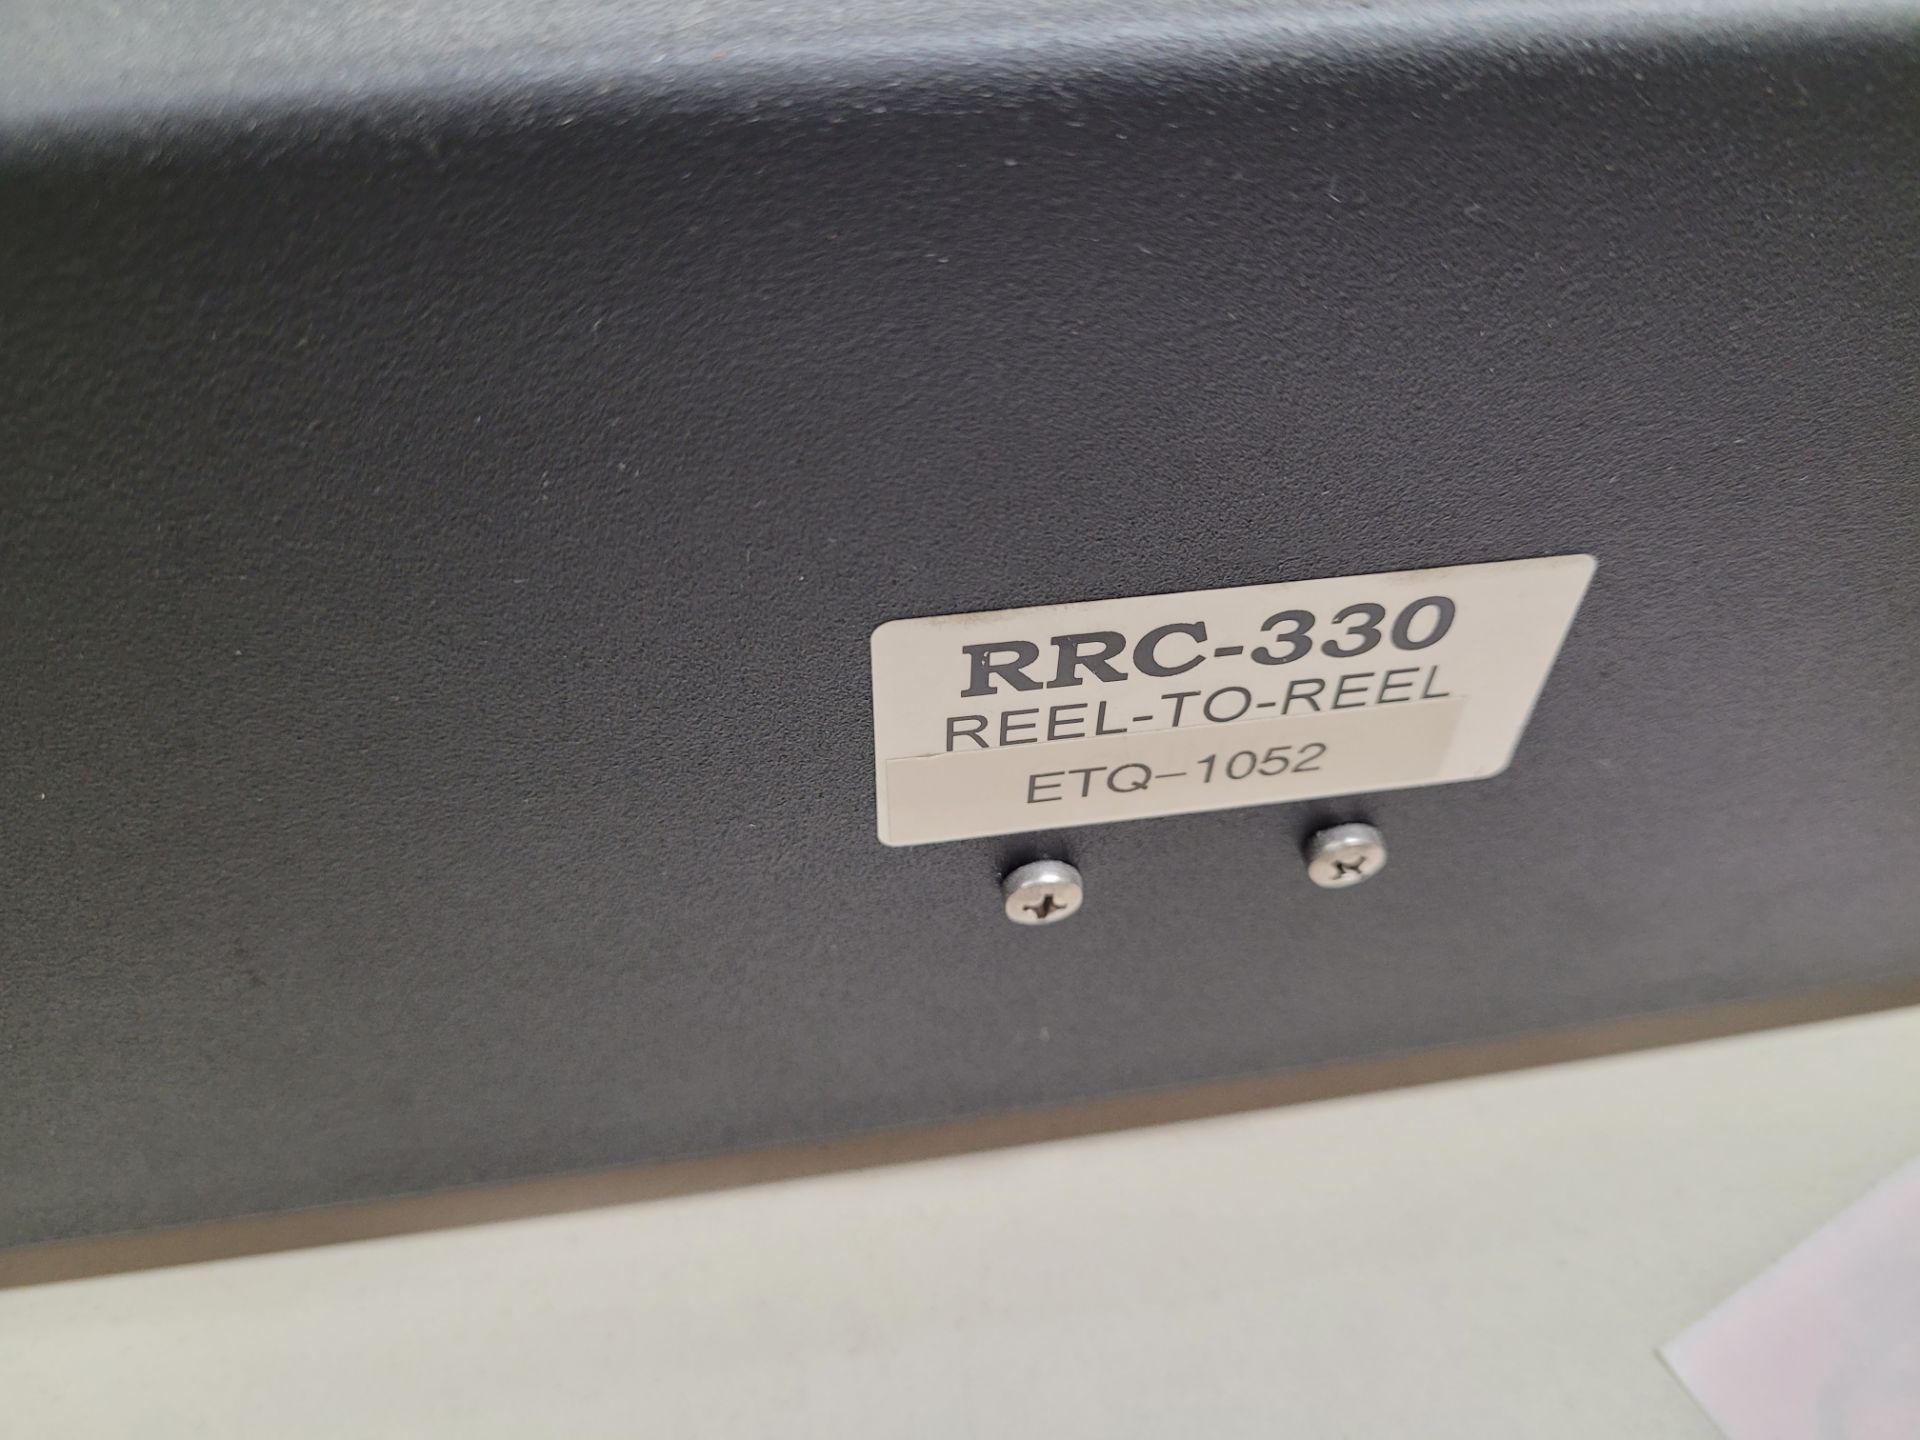 LABELMATE USA Reel-to-Reel counter mod. RRC-330, ETQ-1052, with power supply - Image 5 of 7